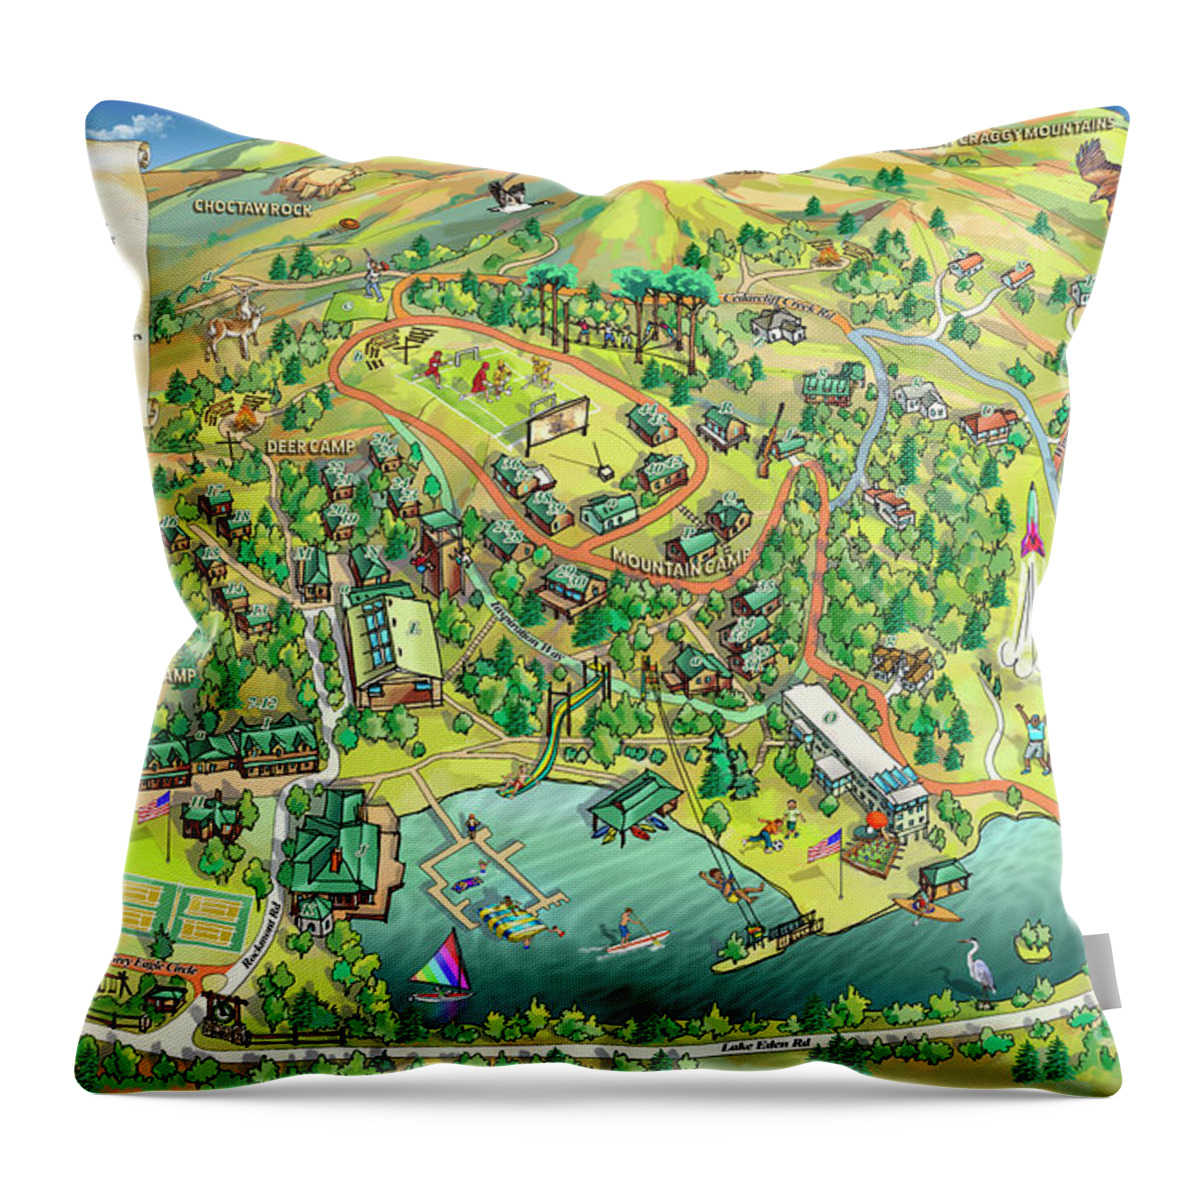 Camp Rockmont Map Illustration Throw Pillow featuring the digital art Camp Rockmont Map Illustration by Maria Rabinky